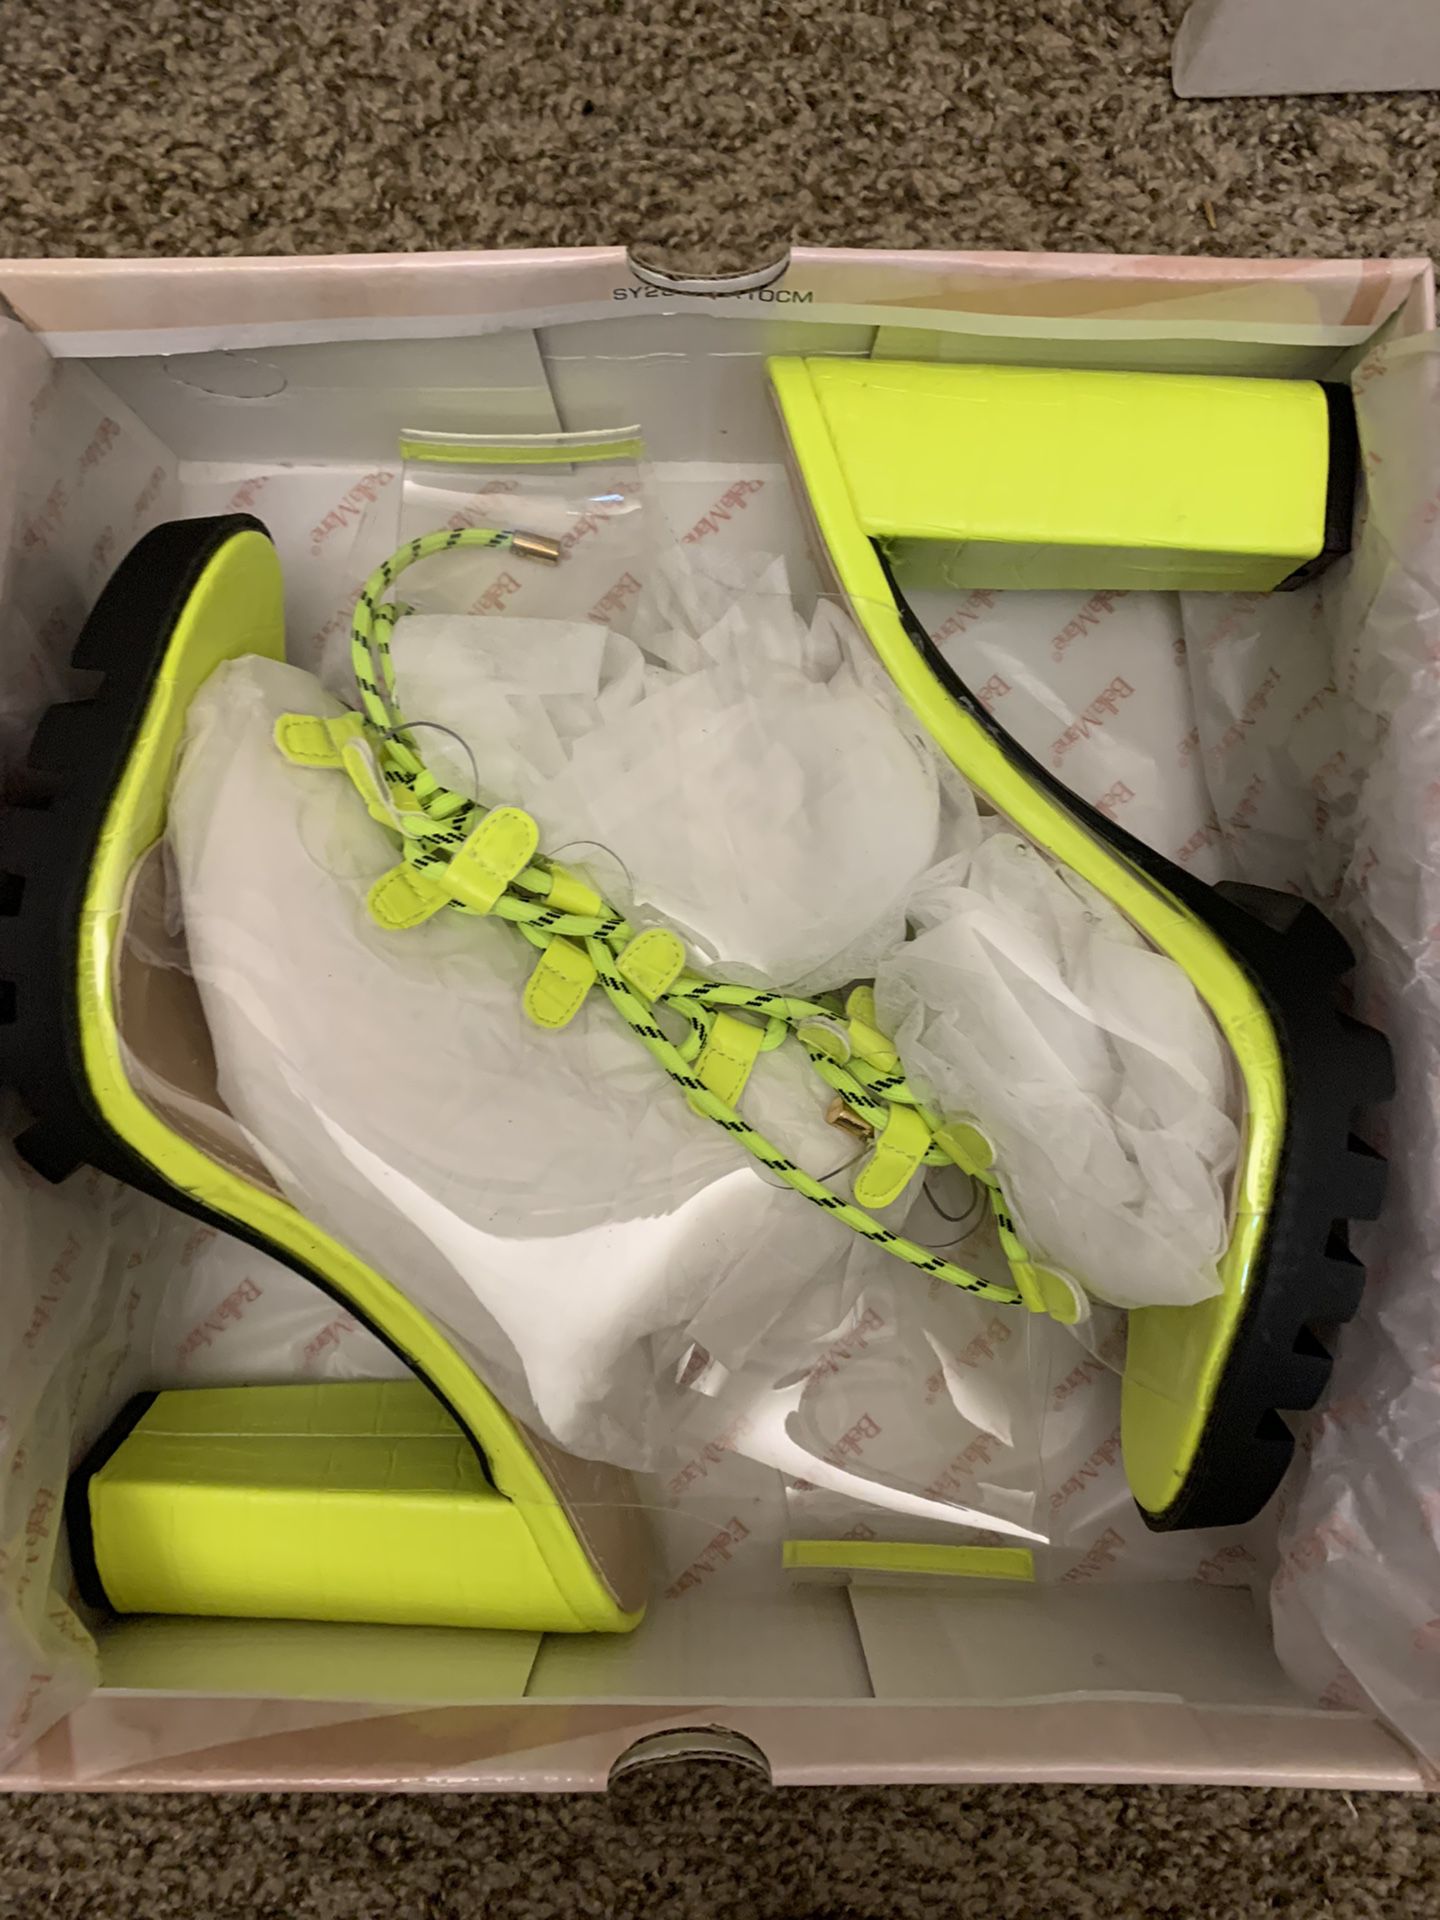 Neon yellow Transparent Chunky High Heels Clear Ankle Boots Lace Up Platform Shoes Size 10